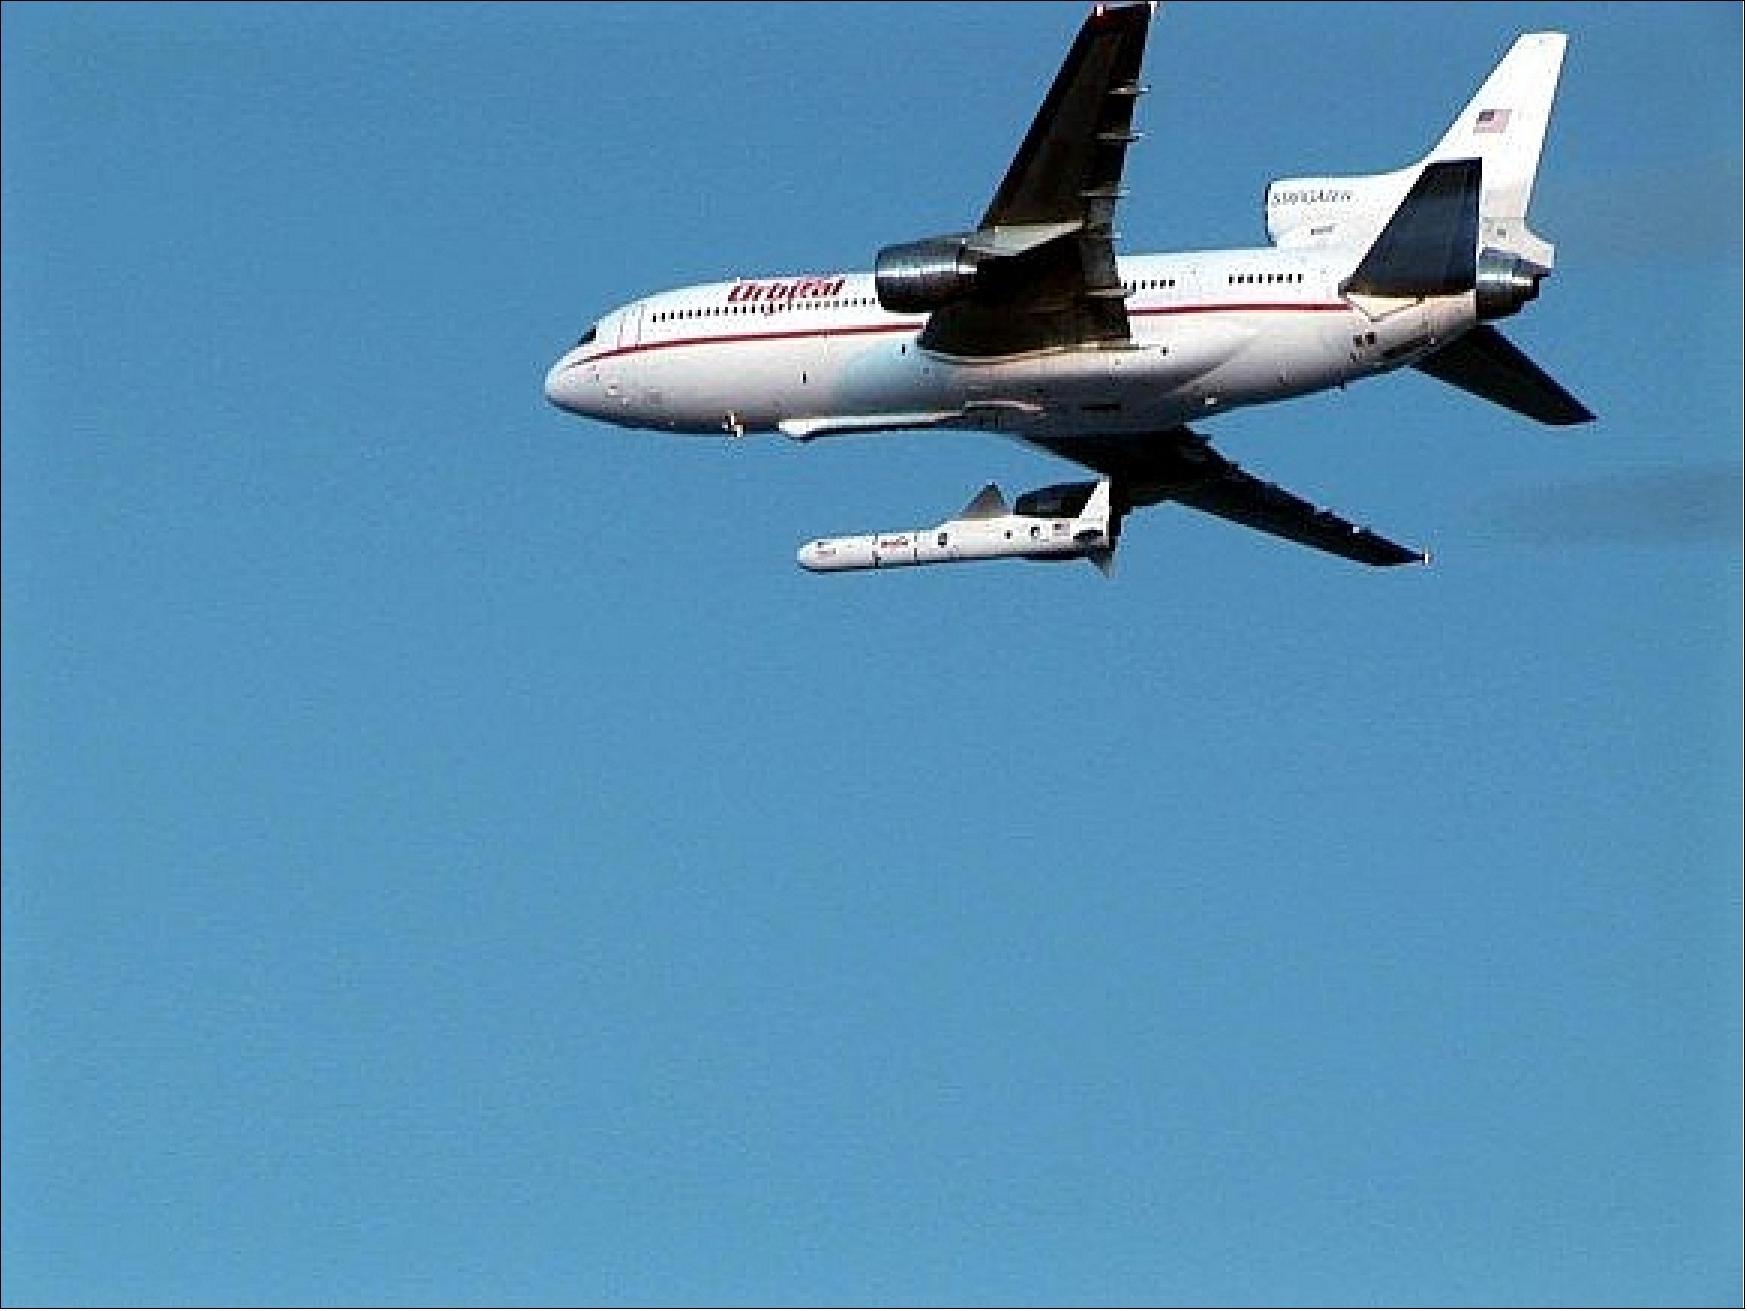 Figure 10: Photo of a Pegasus rocket which launches from underneath the L-1011 "Stargazer" aircraft (image credit: NASA, Orbital)